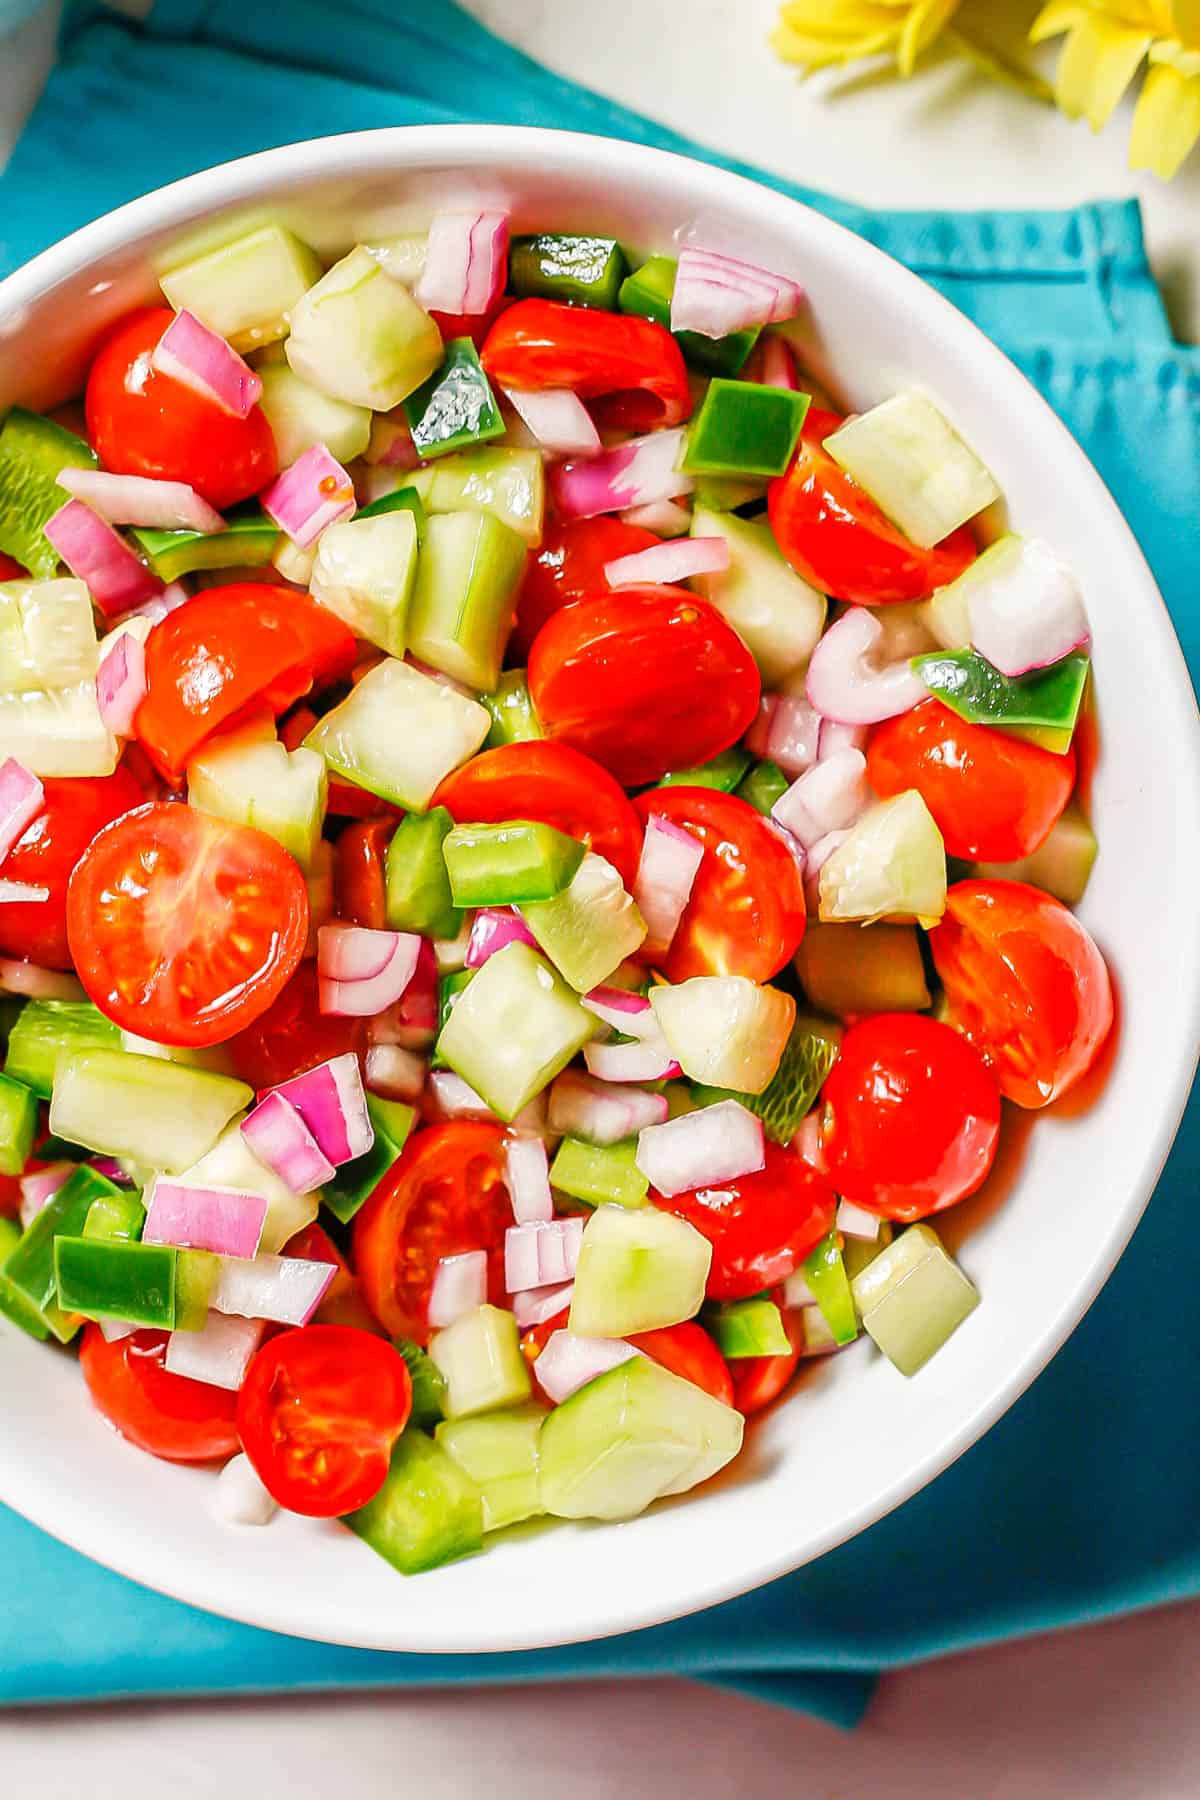 Close up of a colorful marinated vegetable salad in a large white serving bowl set on teal napkins.